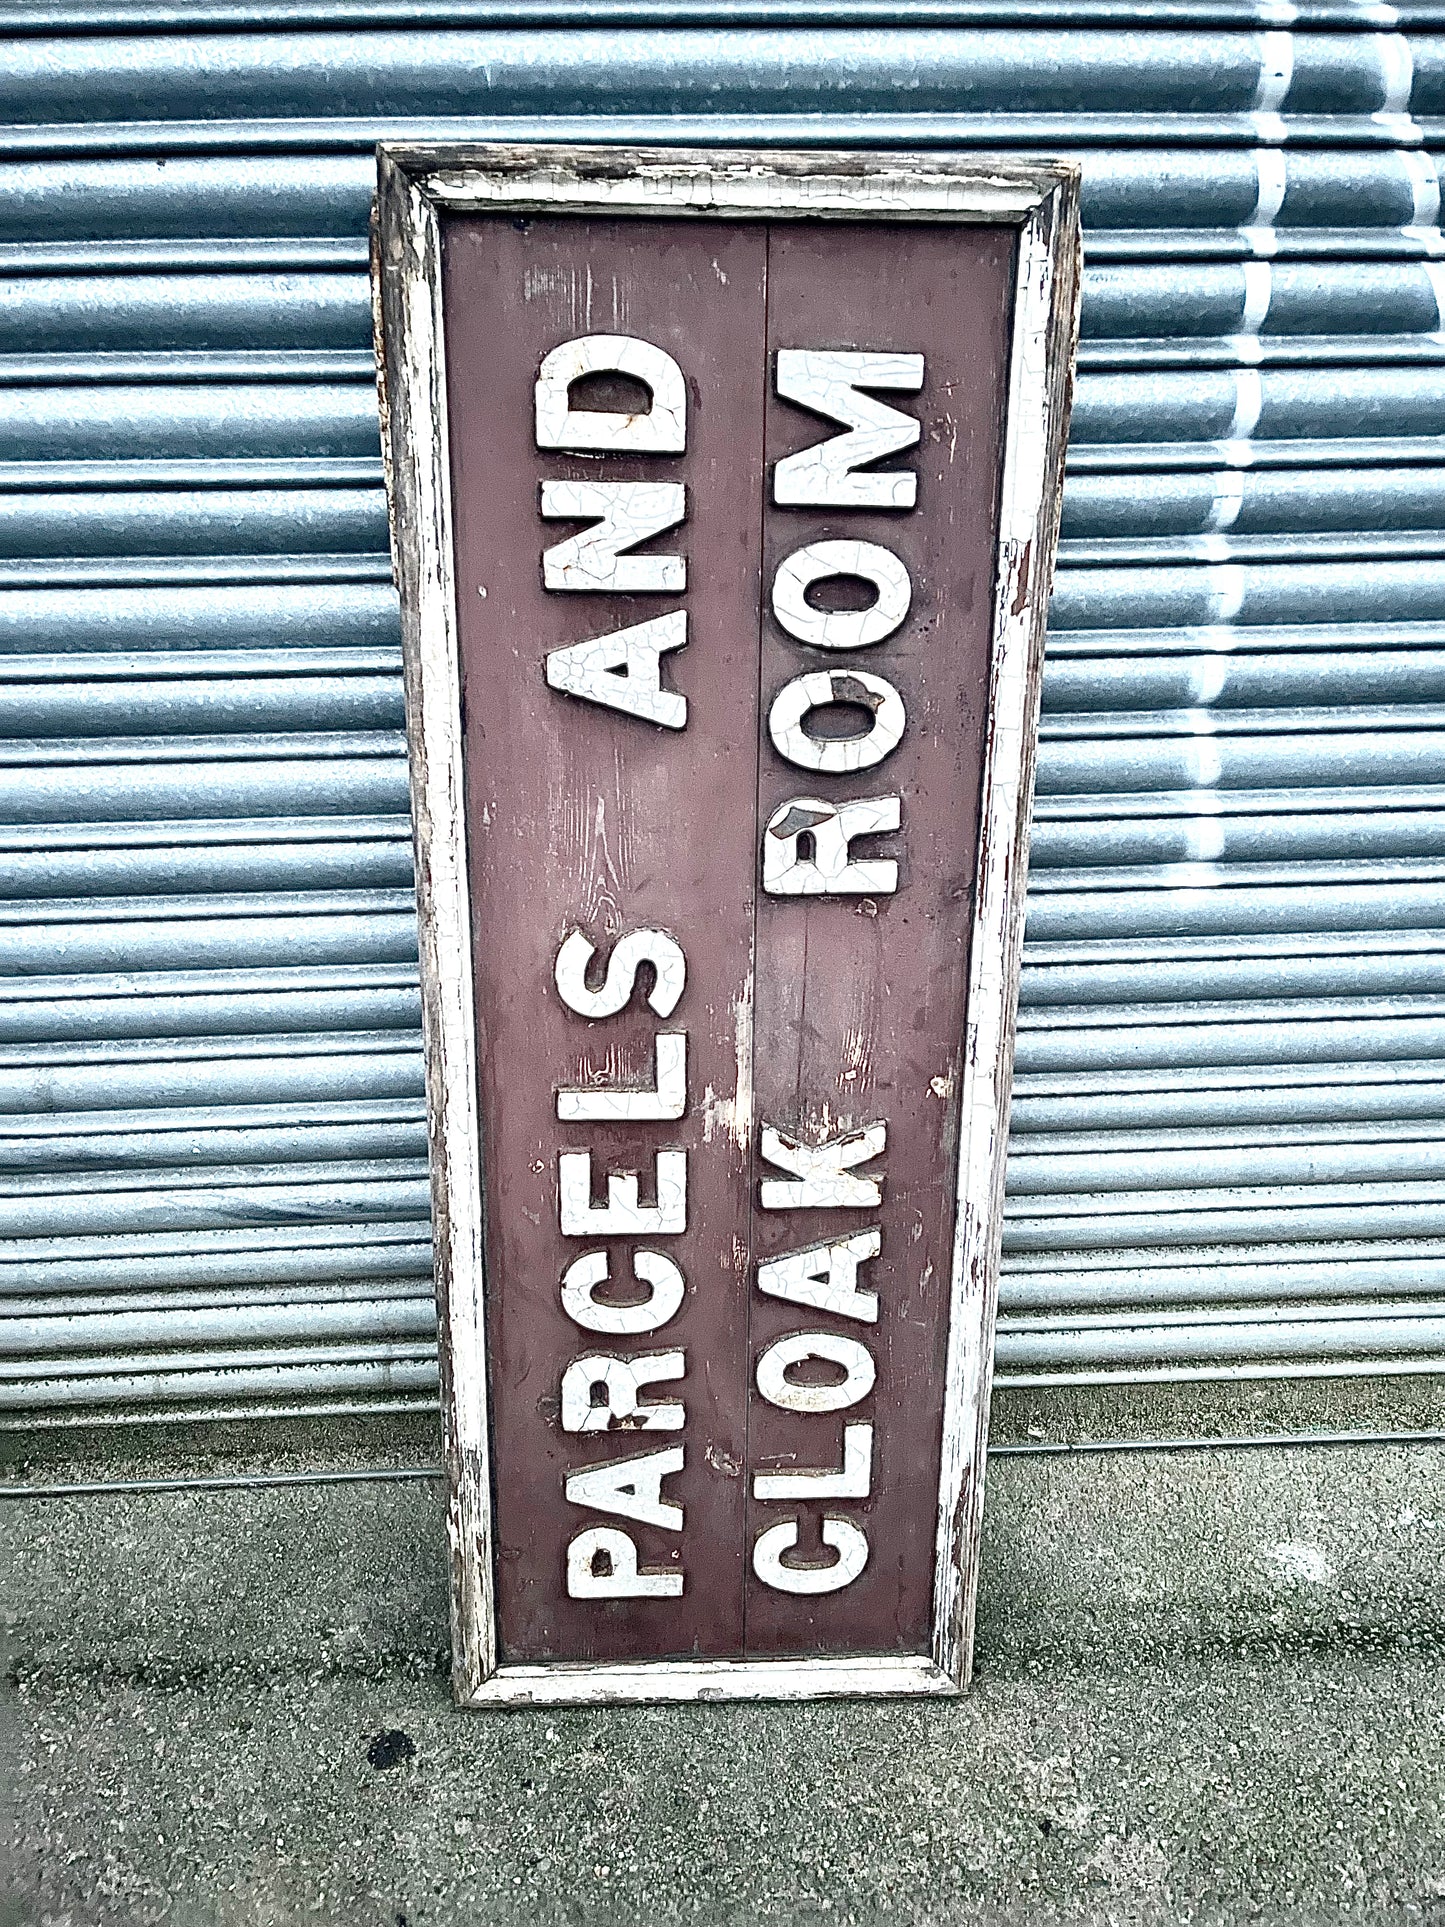 Large Early 1900s GWR Very Large Cloak Room Sign